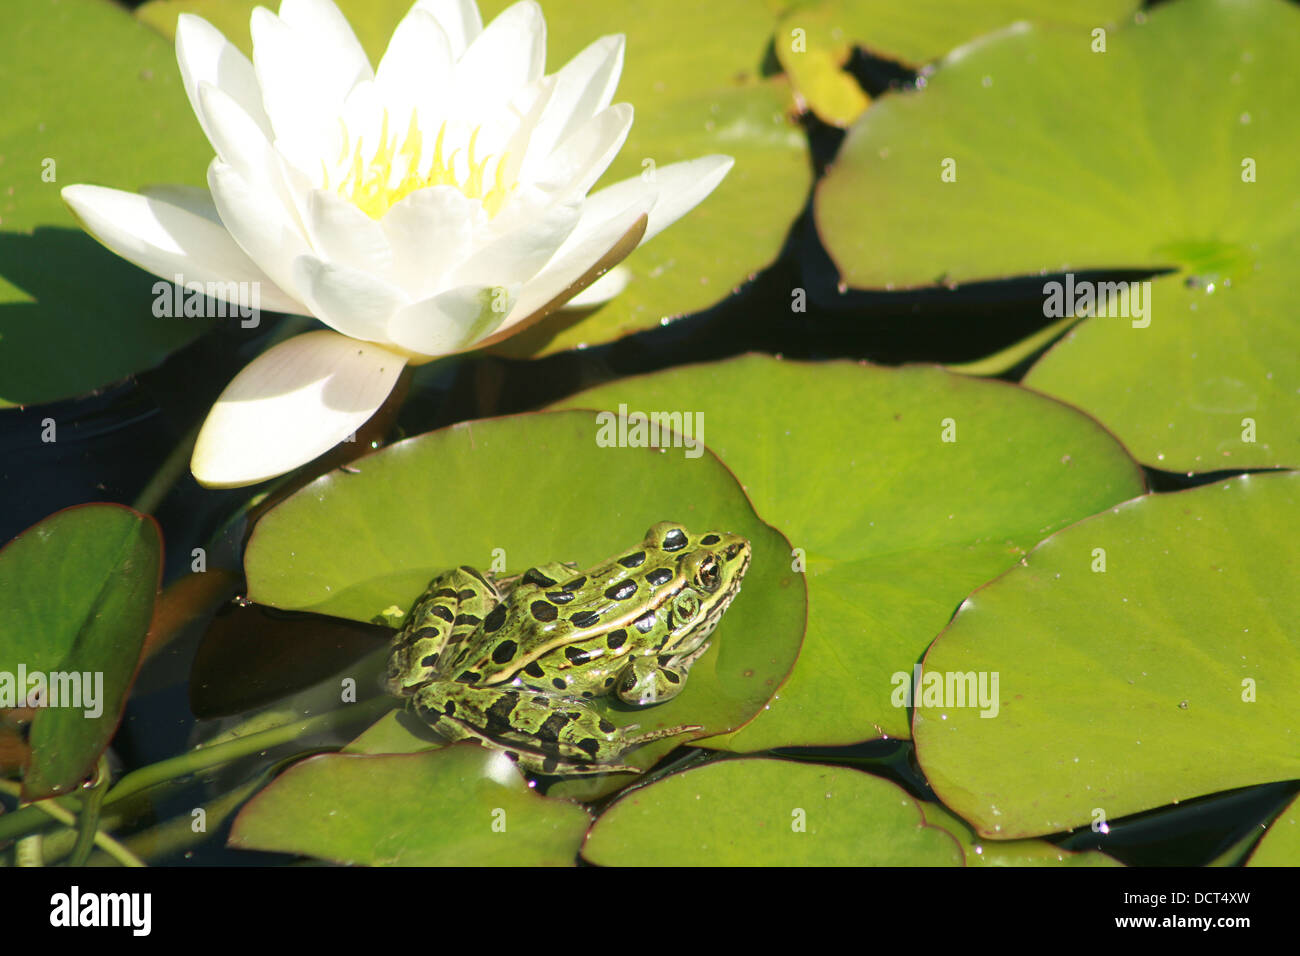 A green frog with black spots on a lily pad next to a water lily in a pond in Winnipeg, Manitoba, Canada Stock Photo